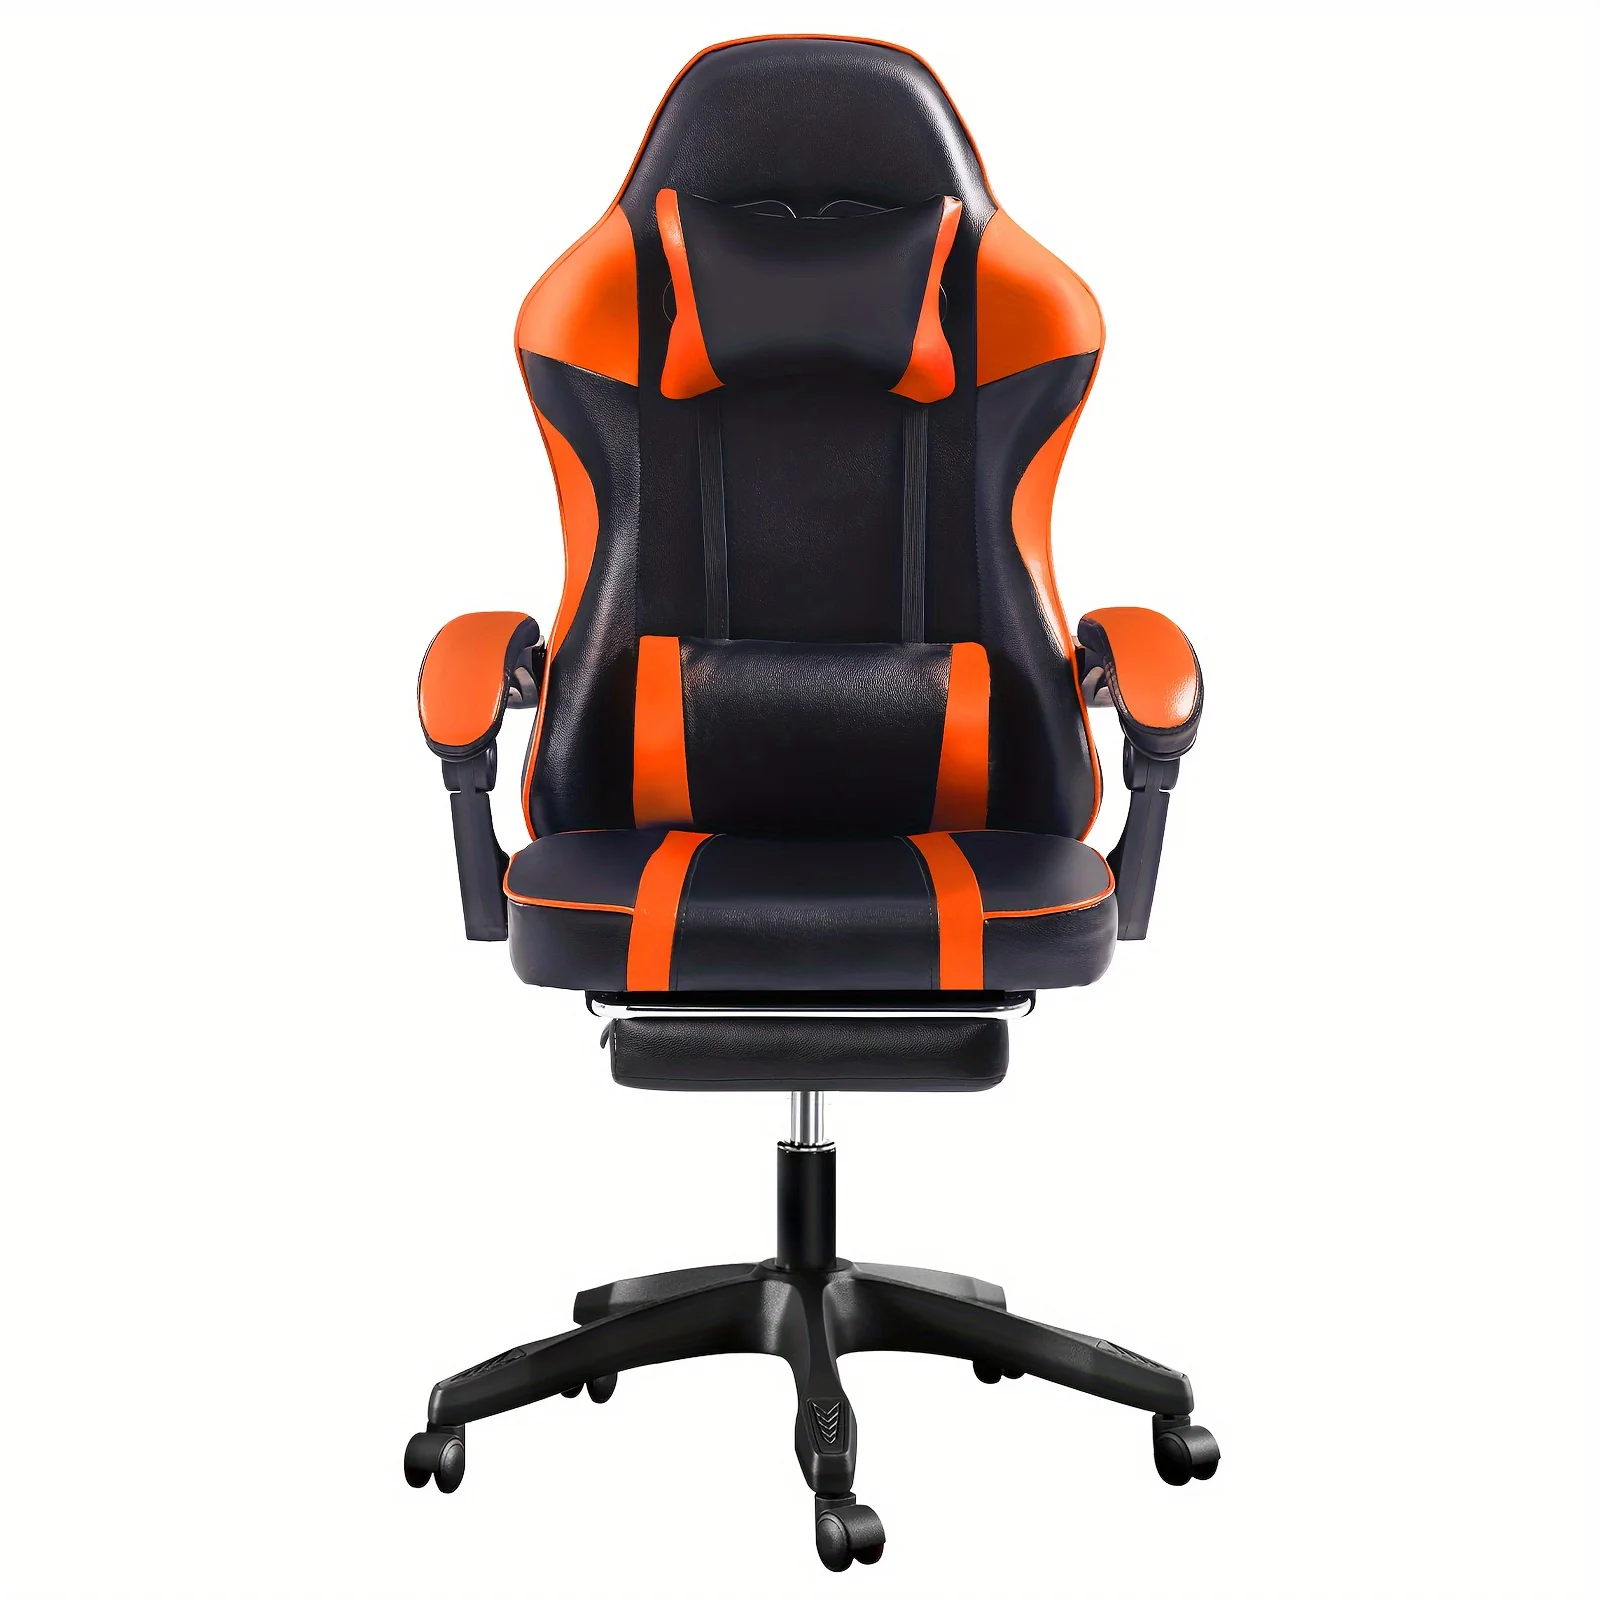 

Video Game Chair for Adults, Computer Chair Gaming Chairs for Kids, Adjustable Lumbar Pillow Headrest Office Desk Chair Gamer Ch